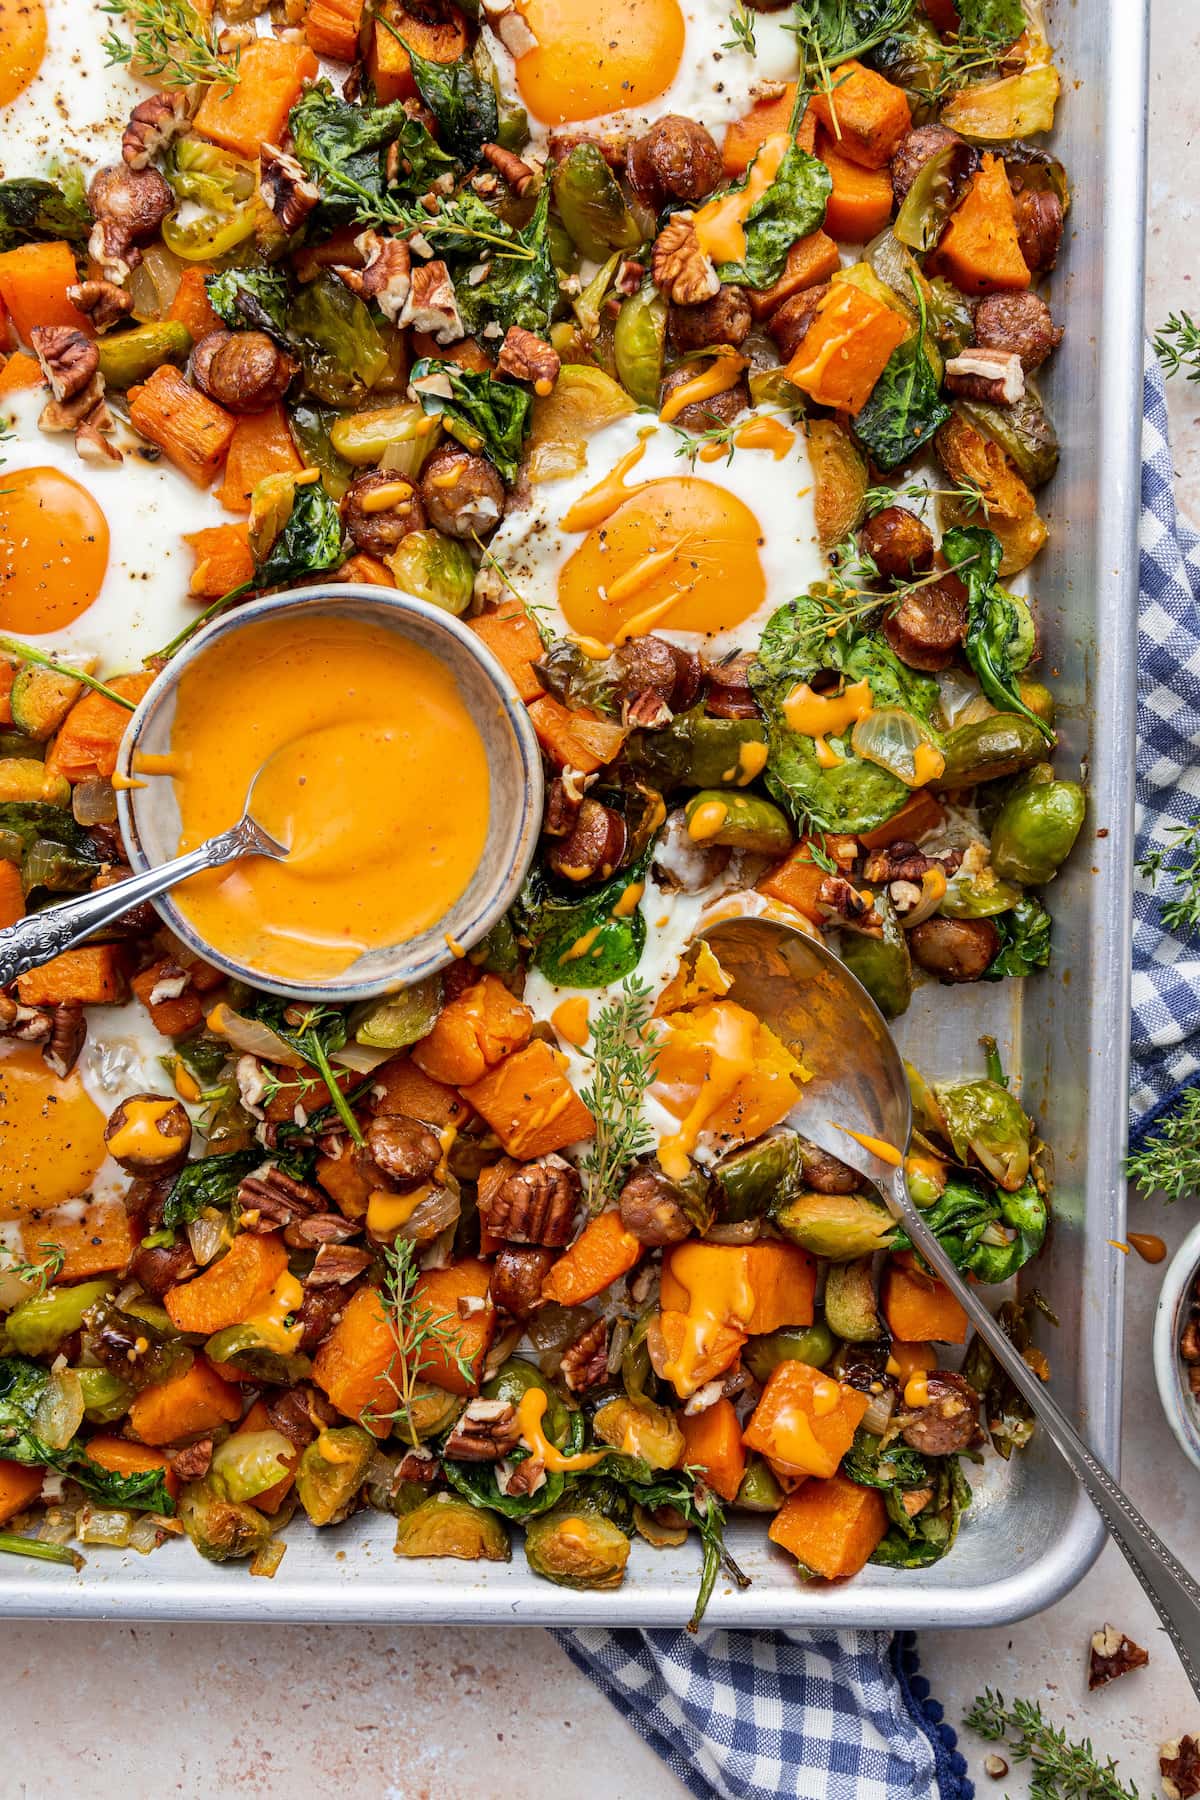 Sweet potato hash on a baking tray with a small bowl of sauce.